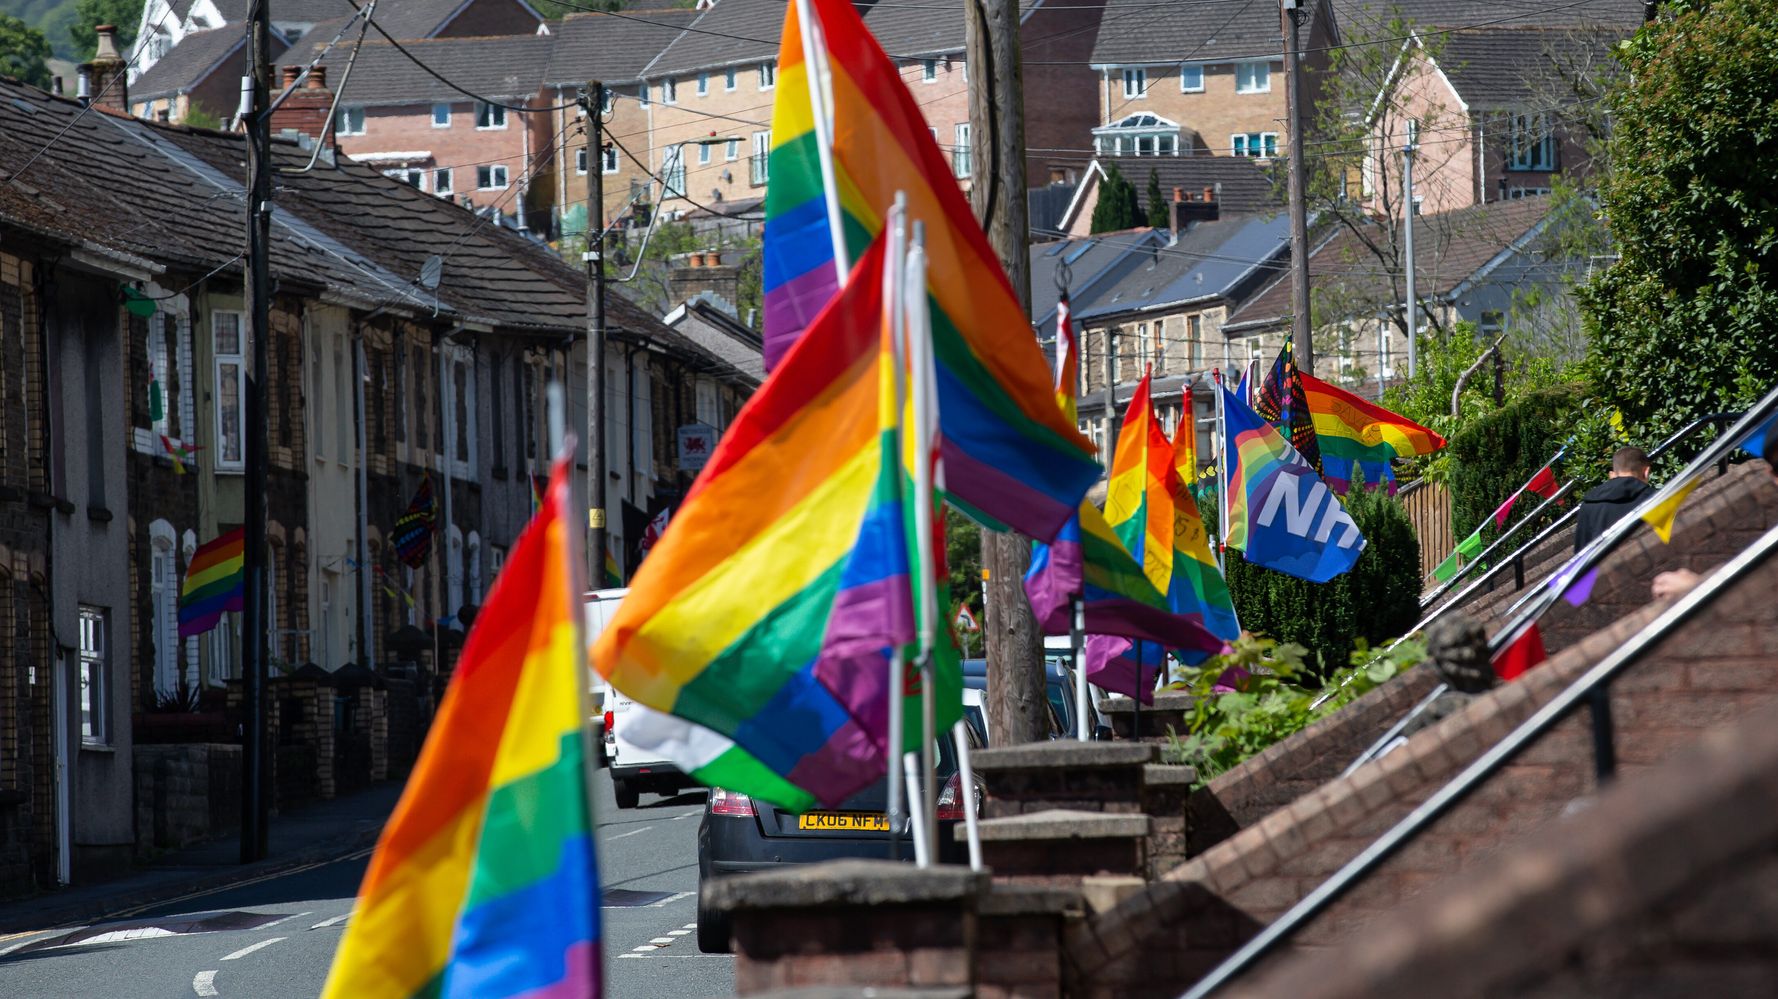 How Long Can The Nhs And Queer Community Share The Rainbow